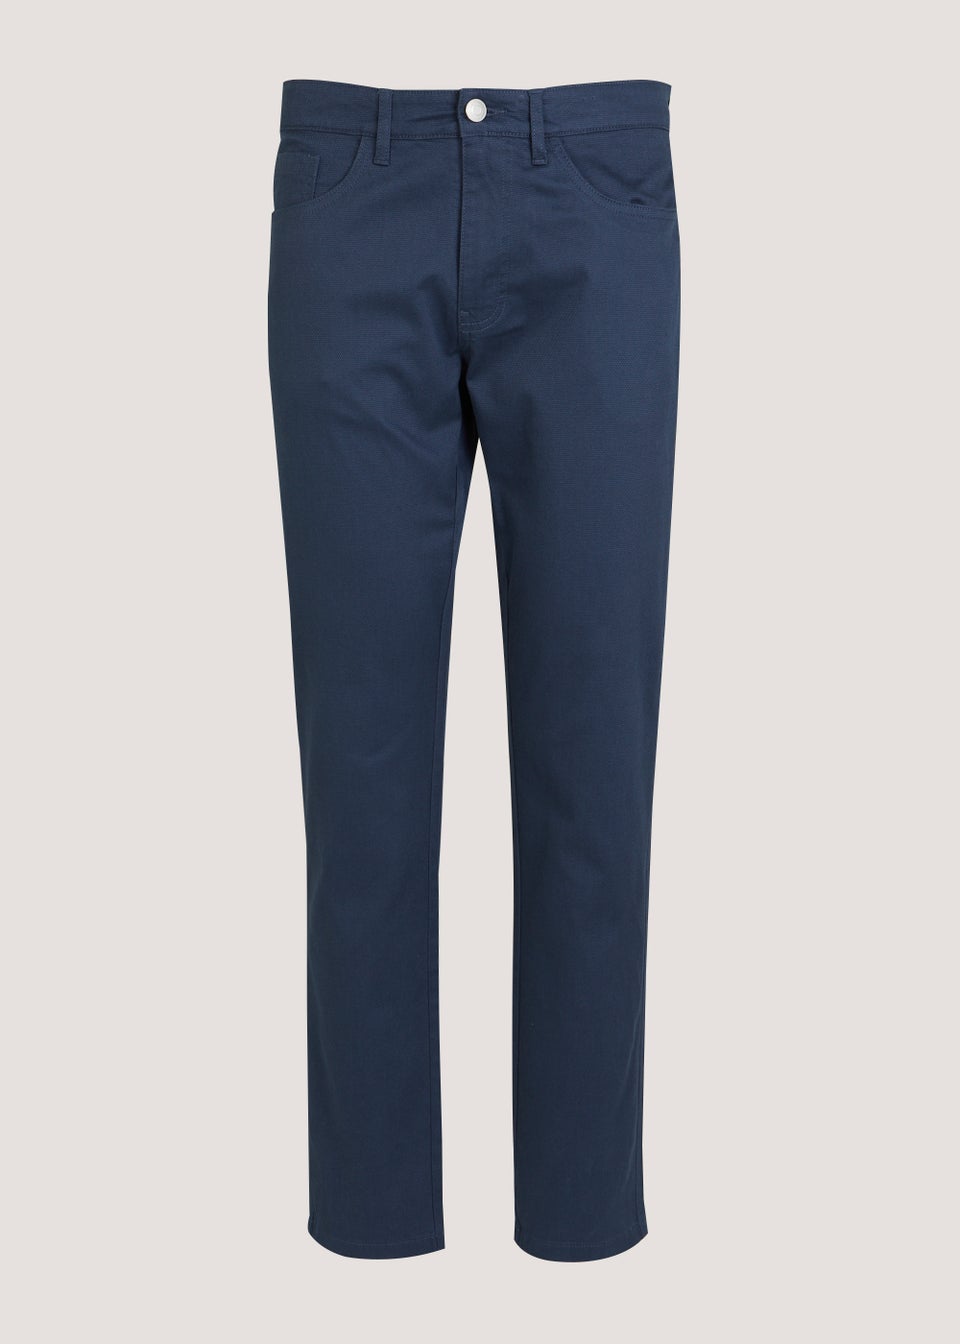 Navy Textured Chino Trousers